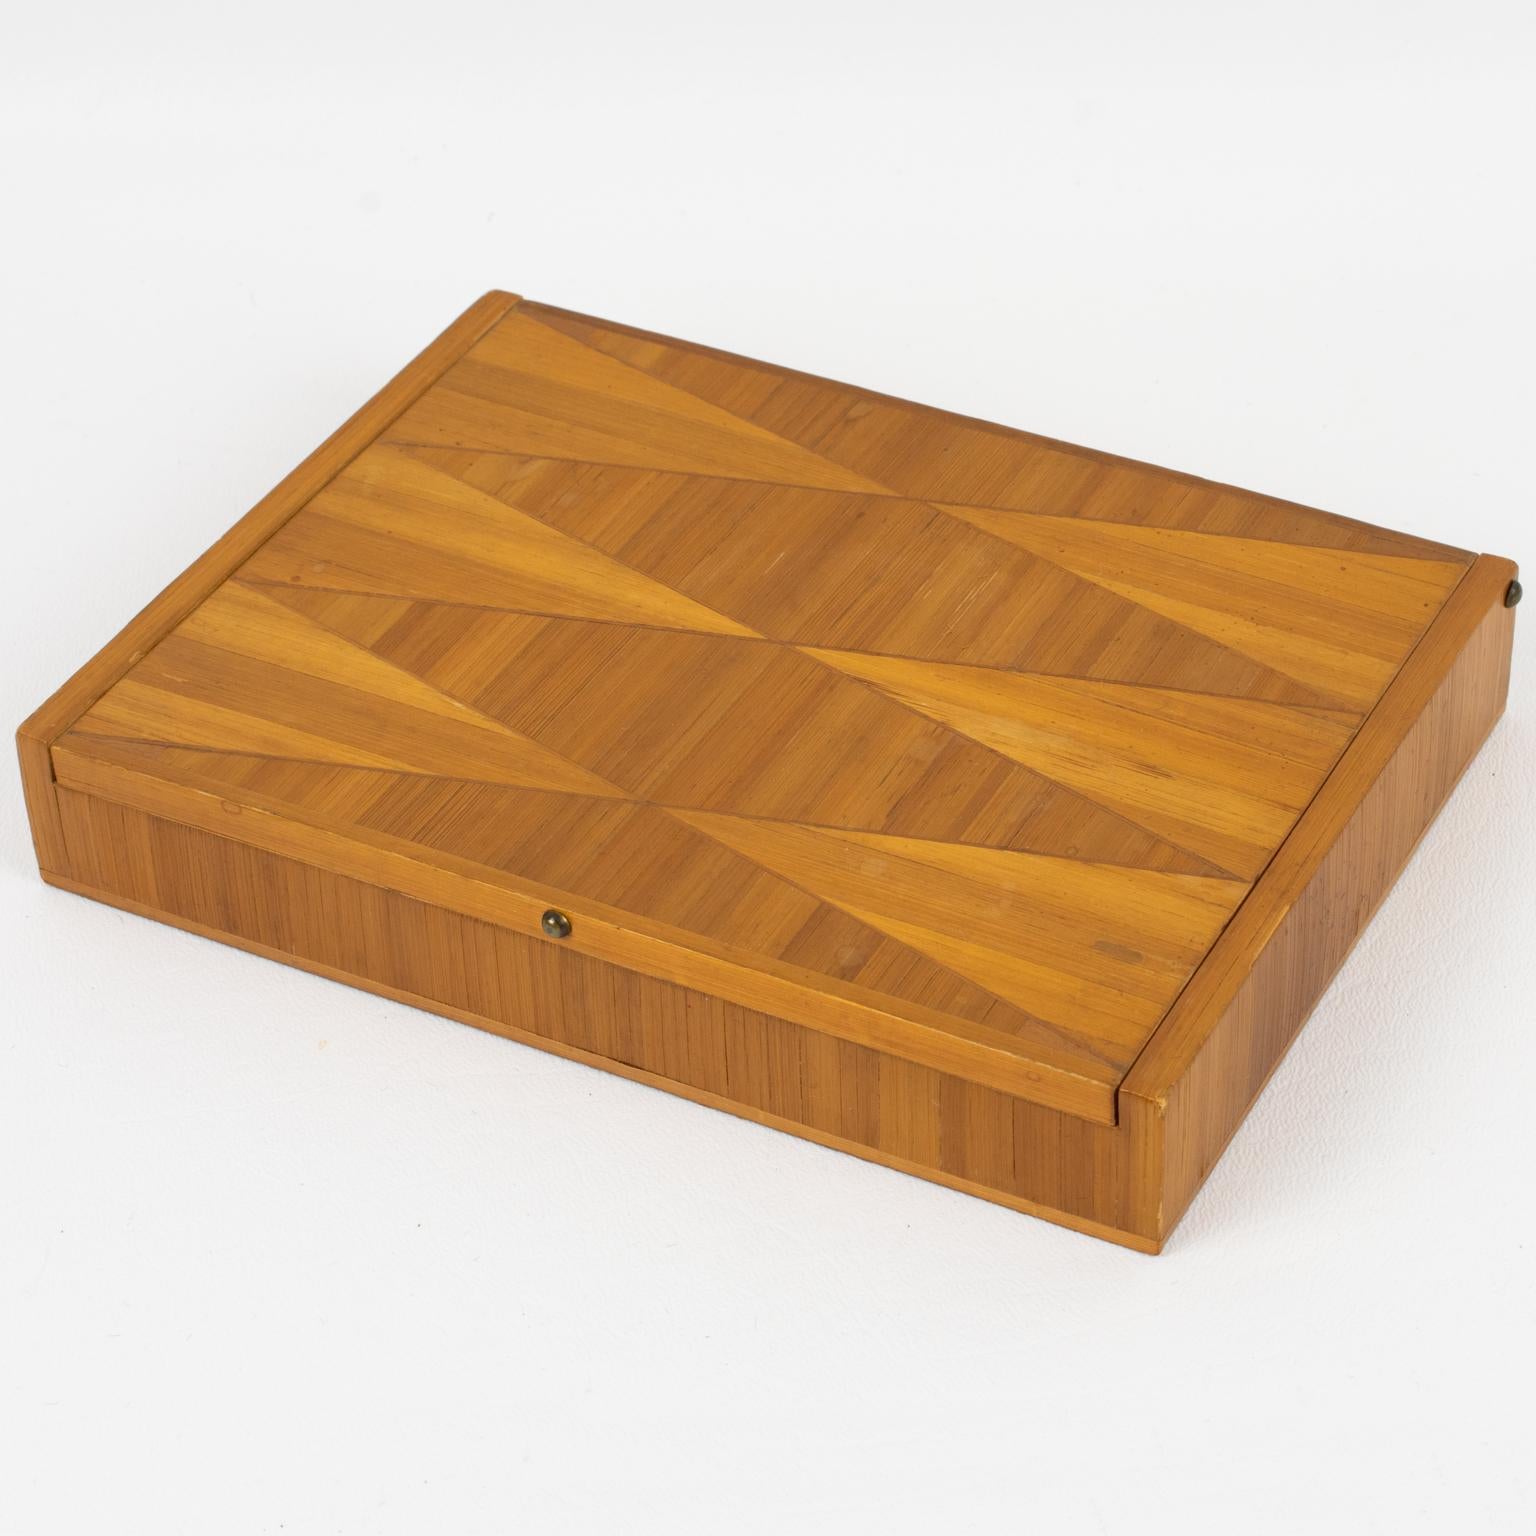 Art Deco Decorative Straw Marquetry Box, France 1930s attributed to Jean Michel Frank For Sale